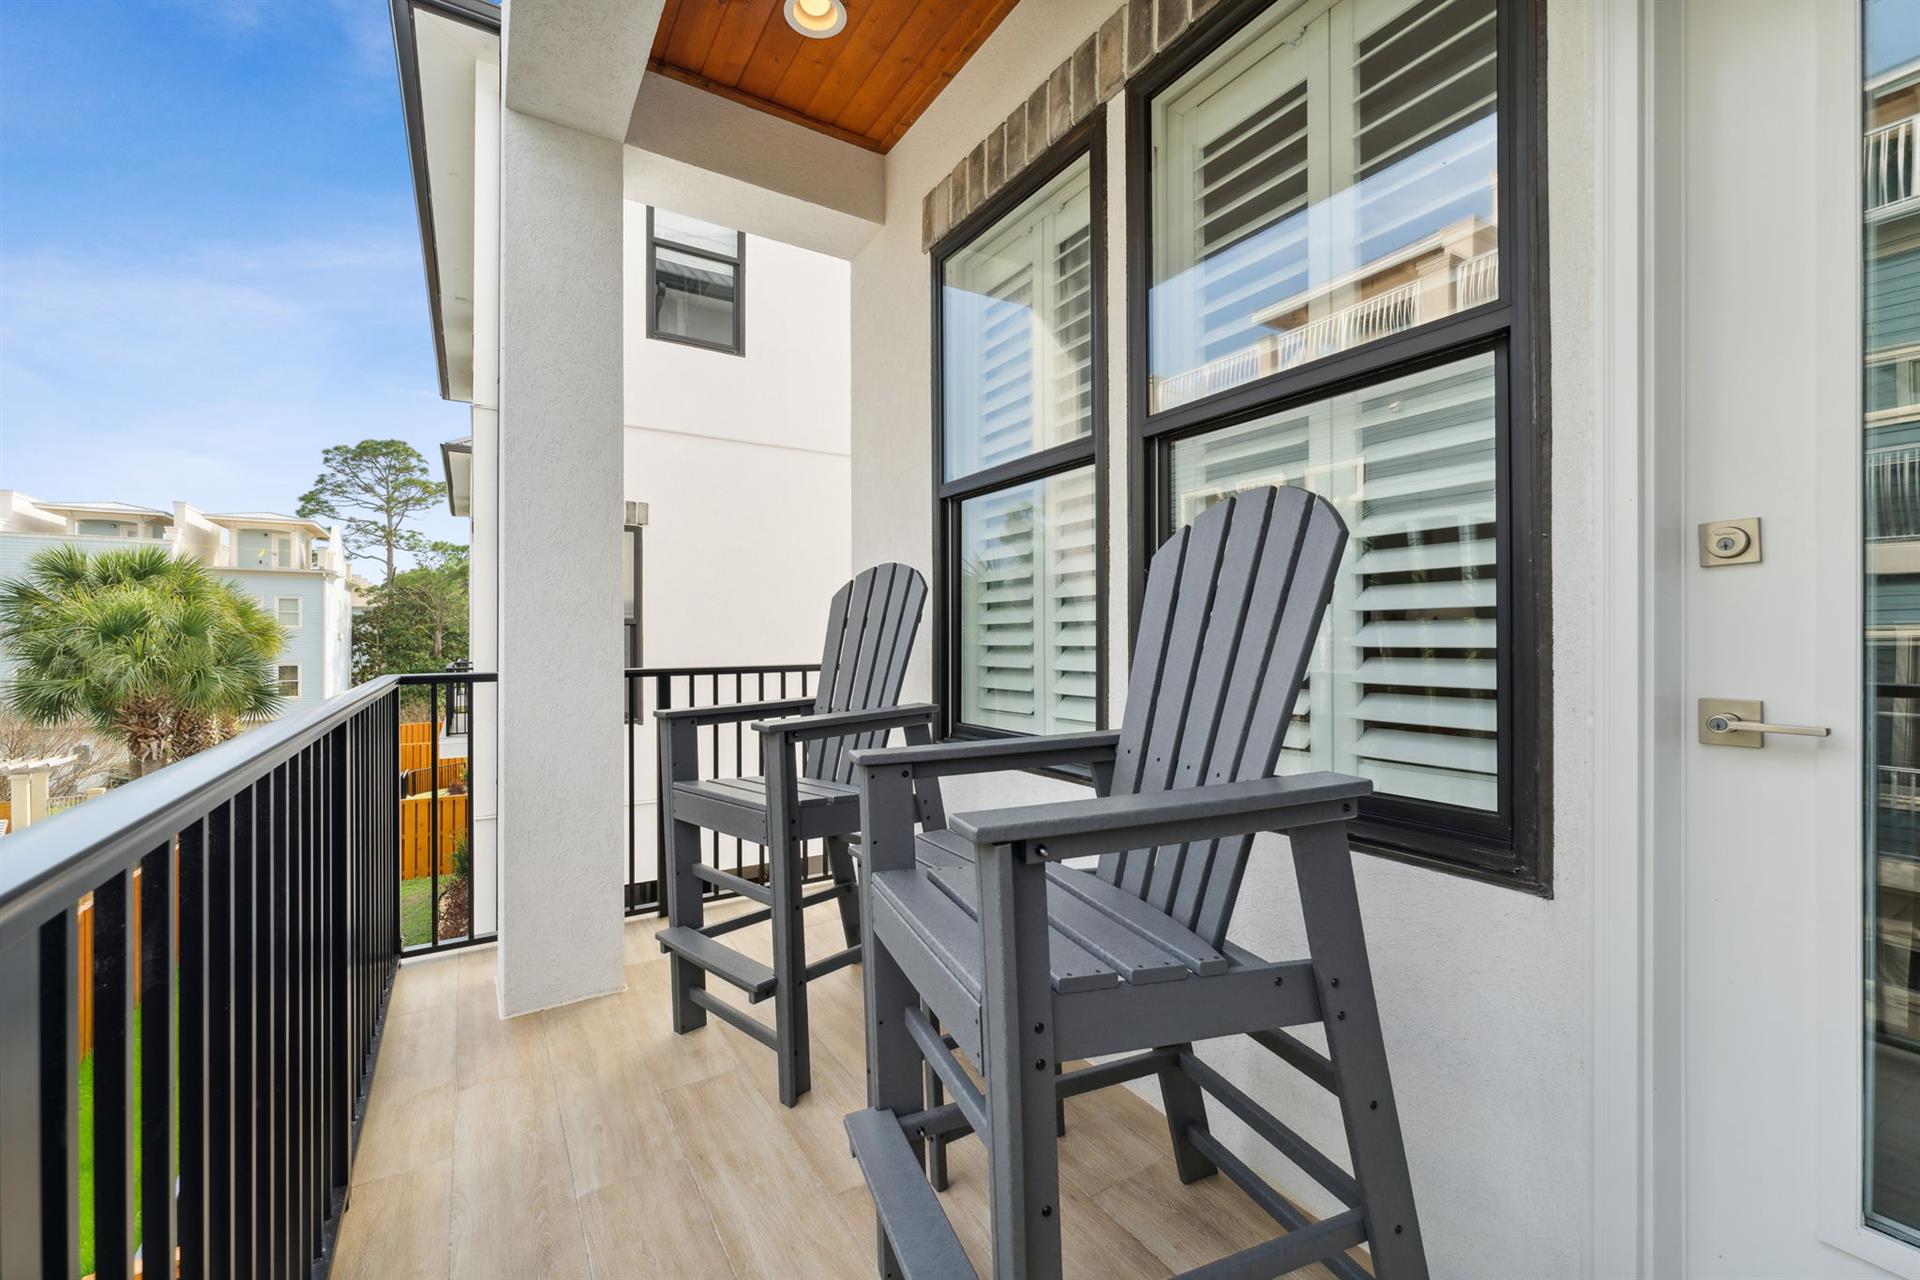 Second Floor Balcony, access from living room or king bedroom